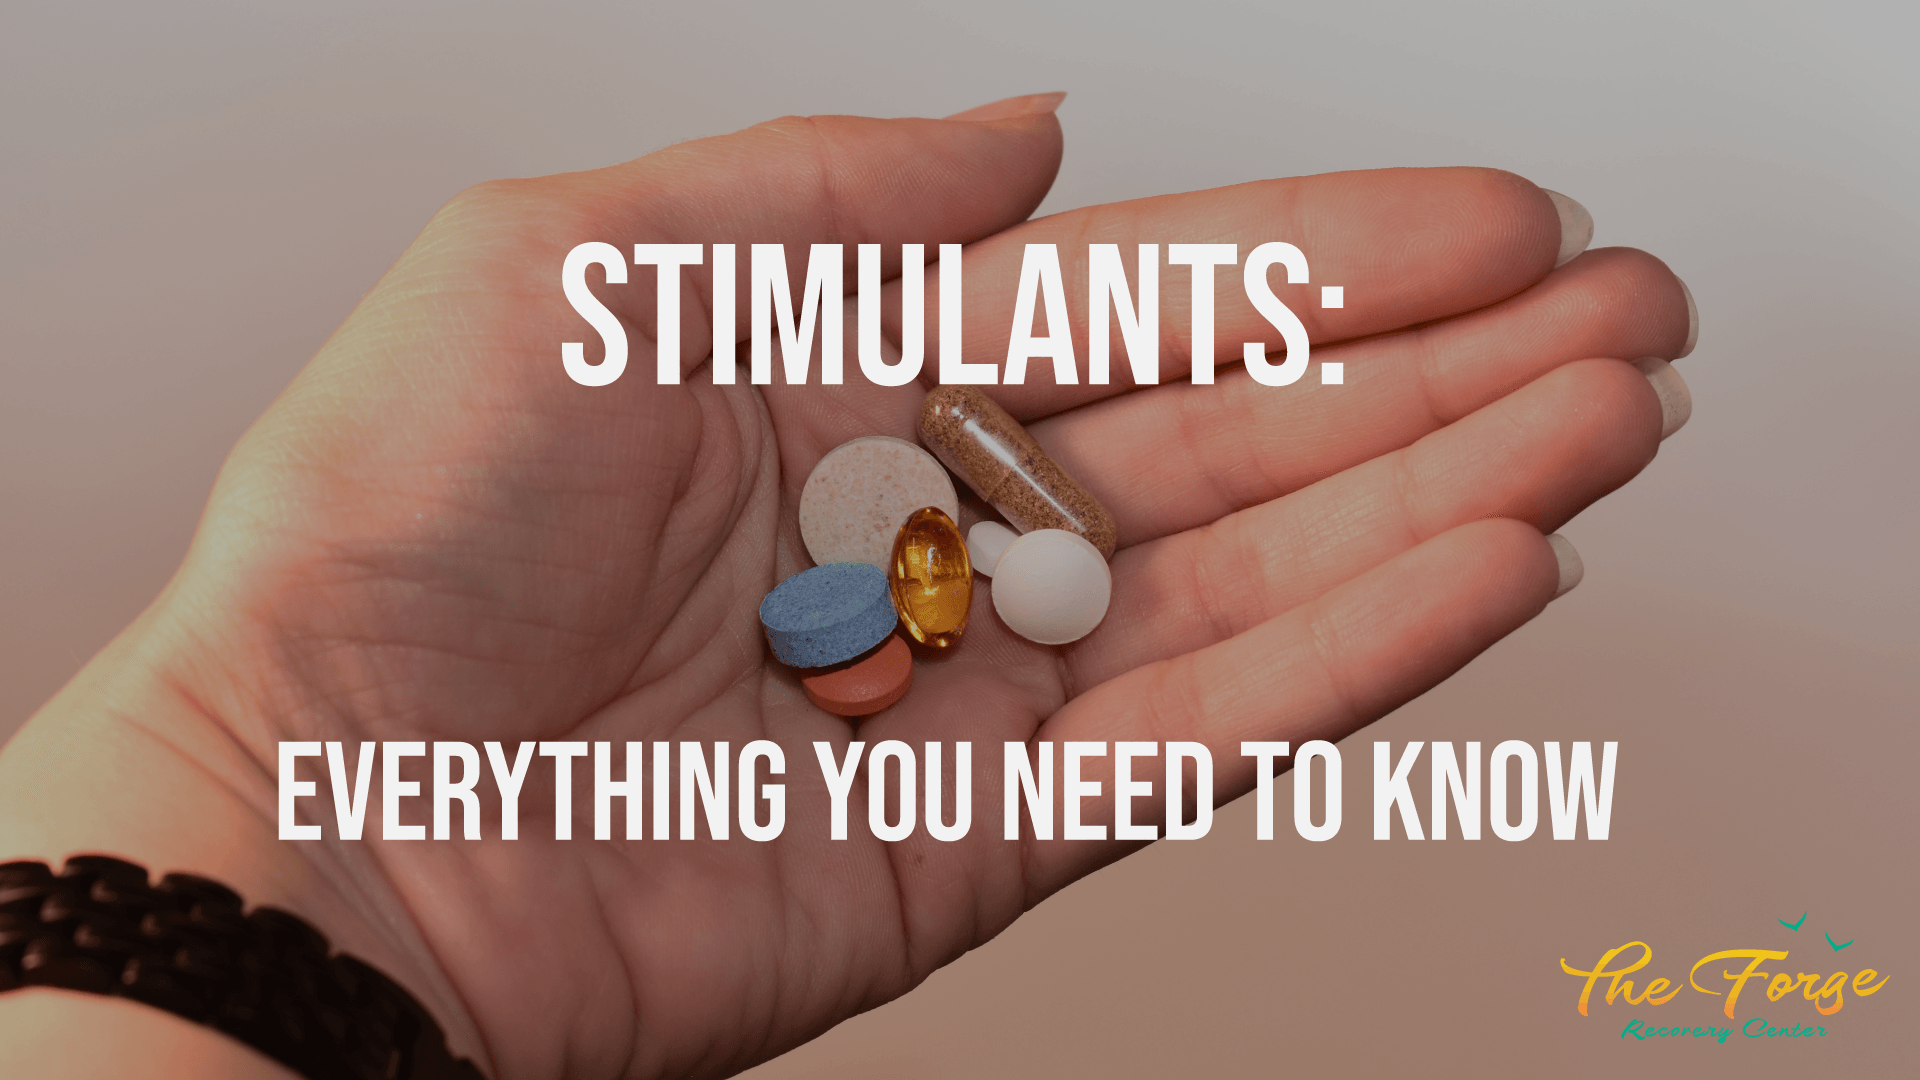 Stimulants: Your Guide to Stimulant Drugs Like Meth, Cocaine, & More